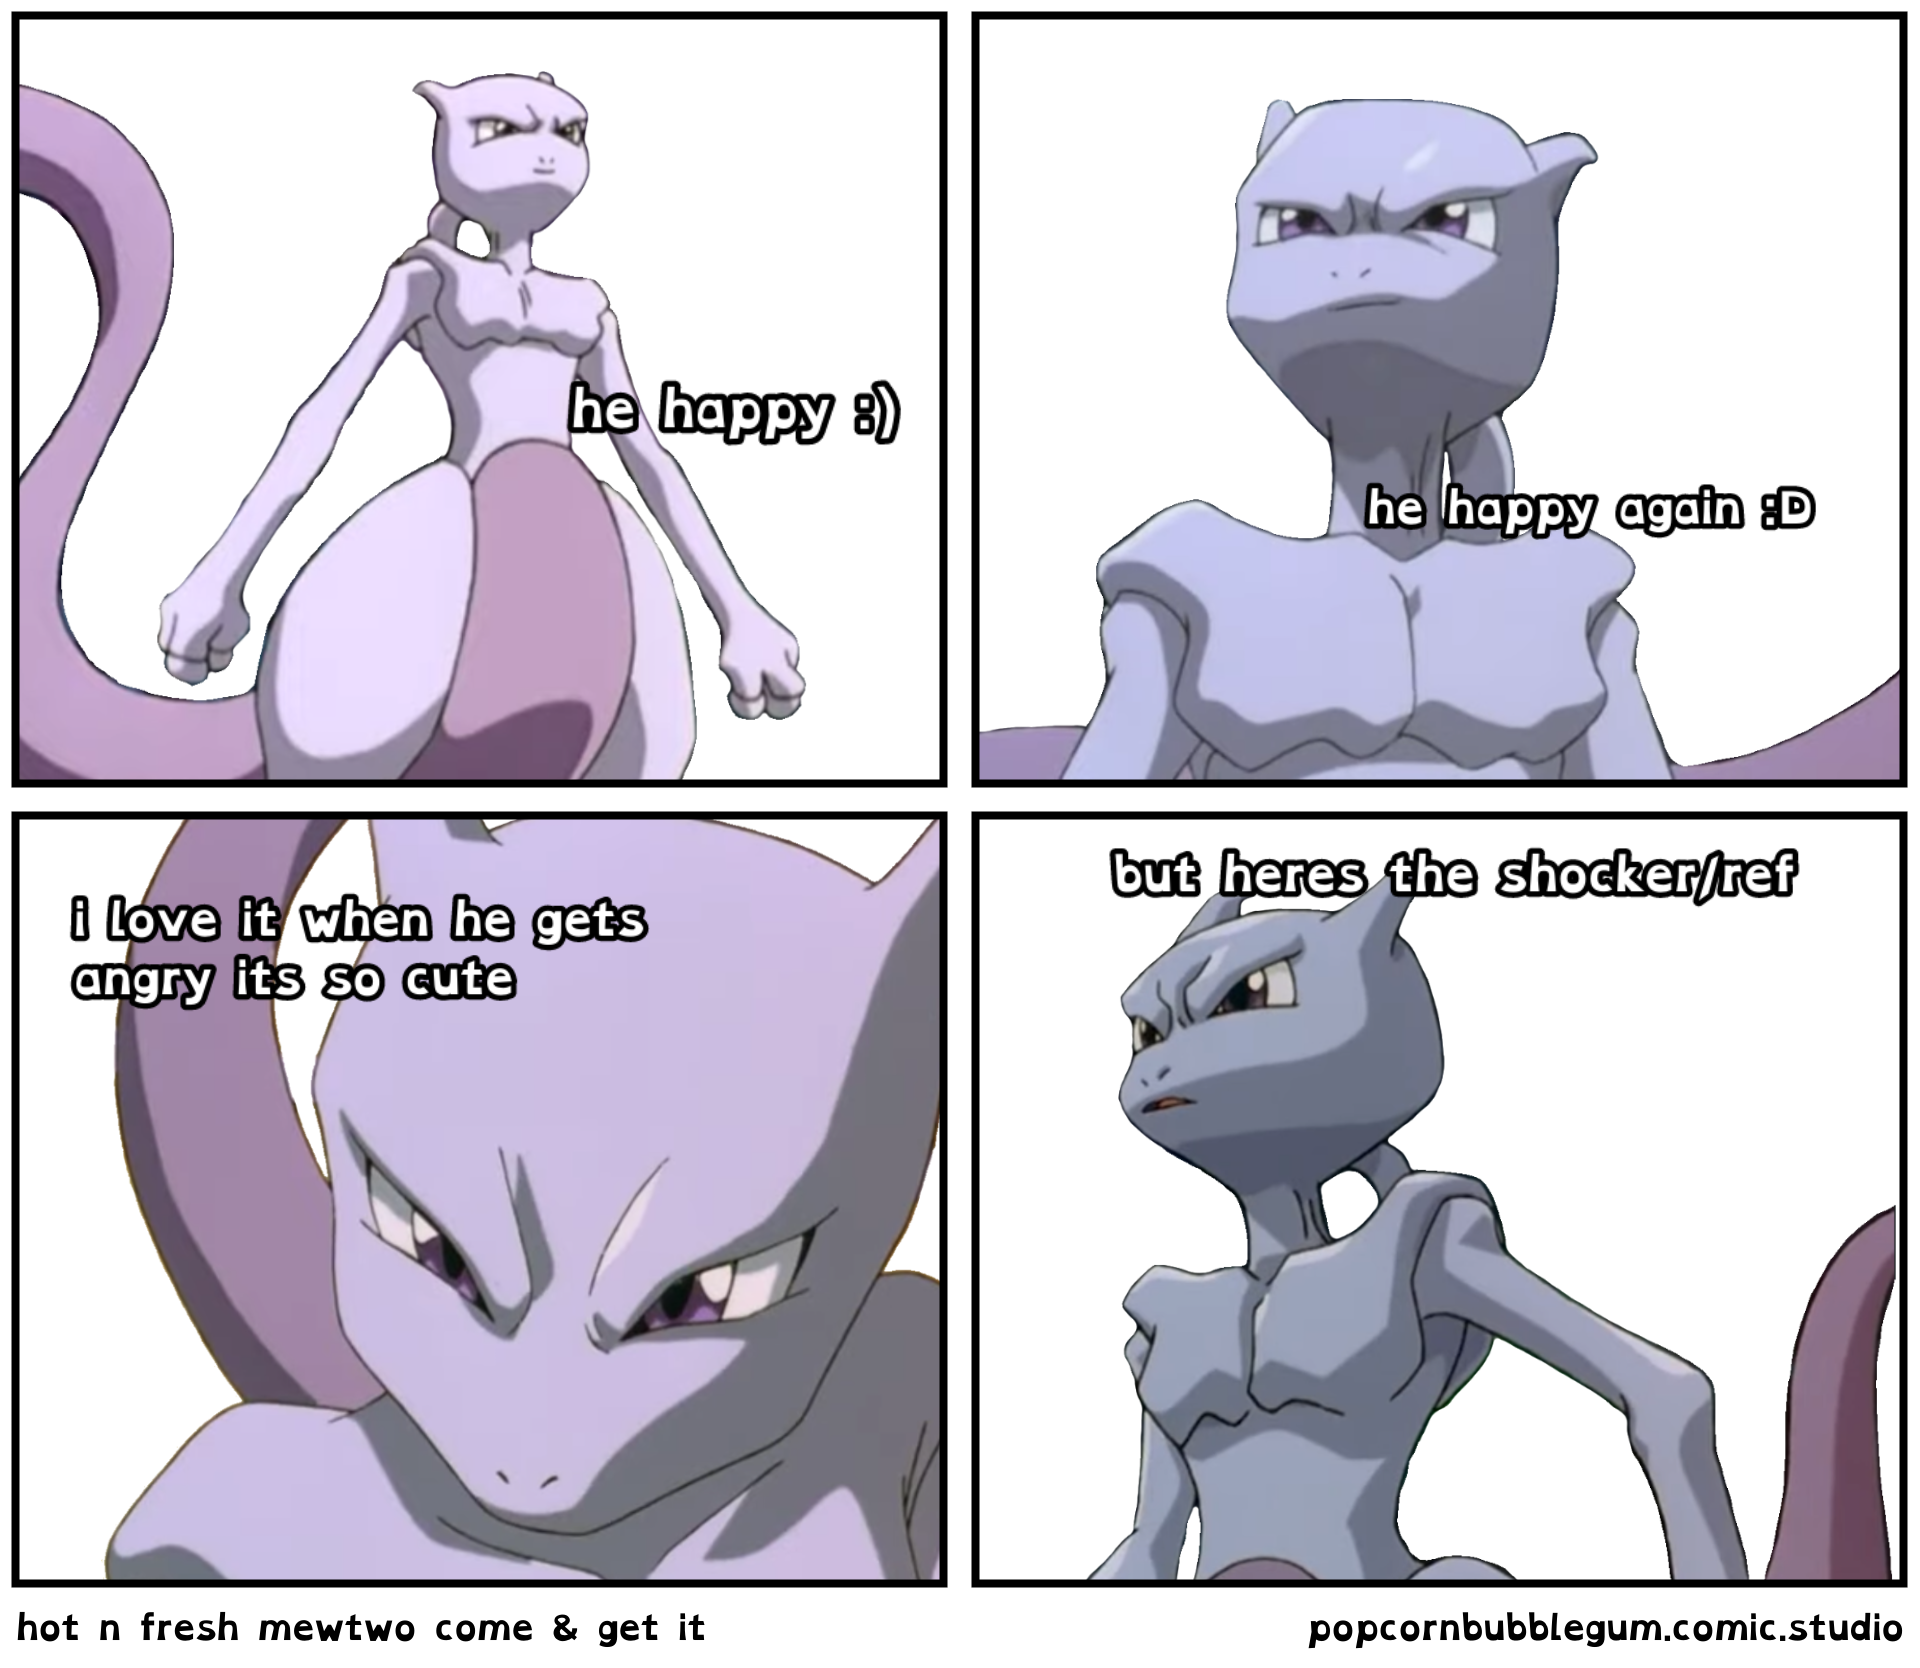 hot n fresh mewtwo come & get it